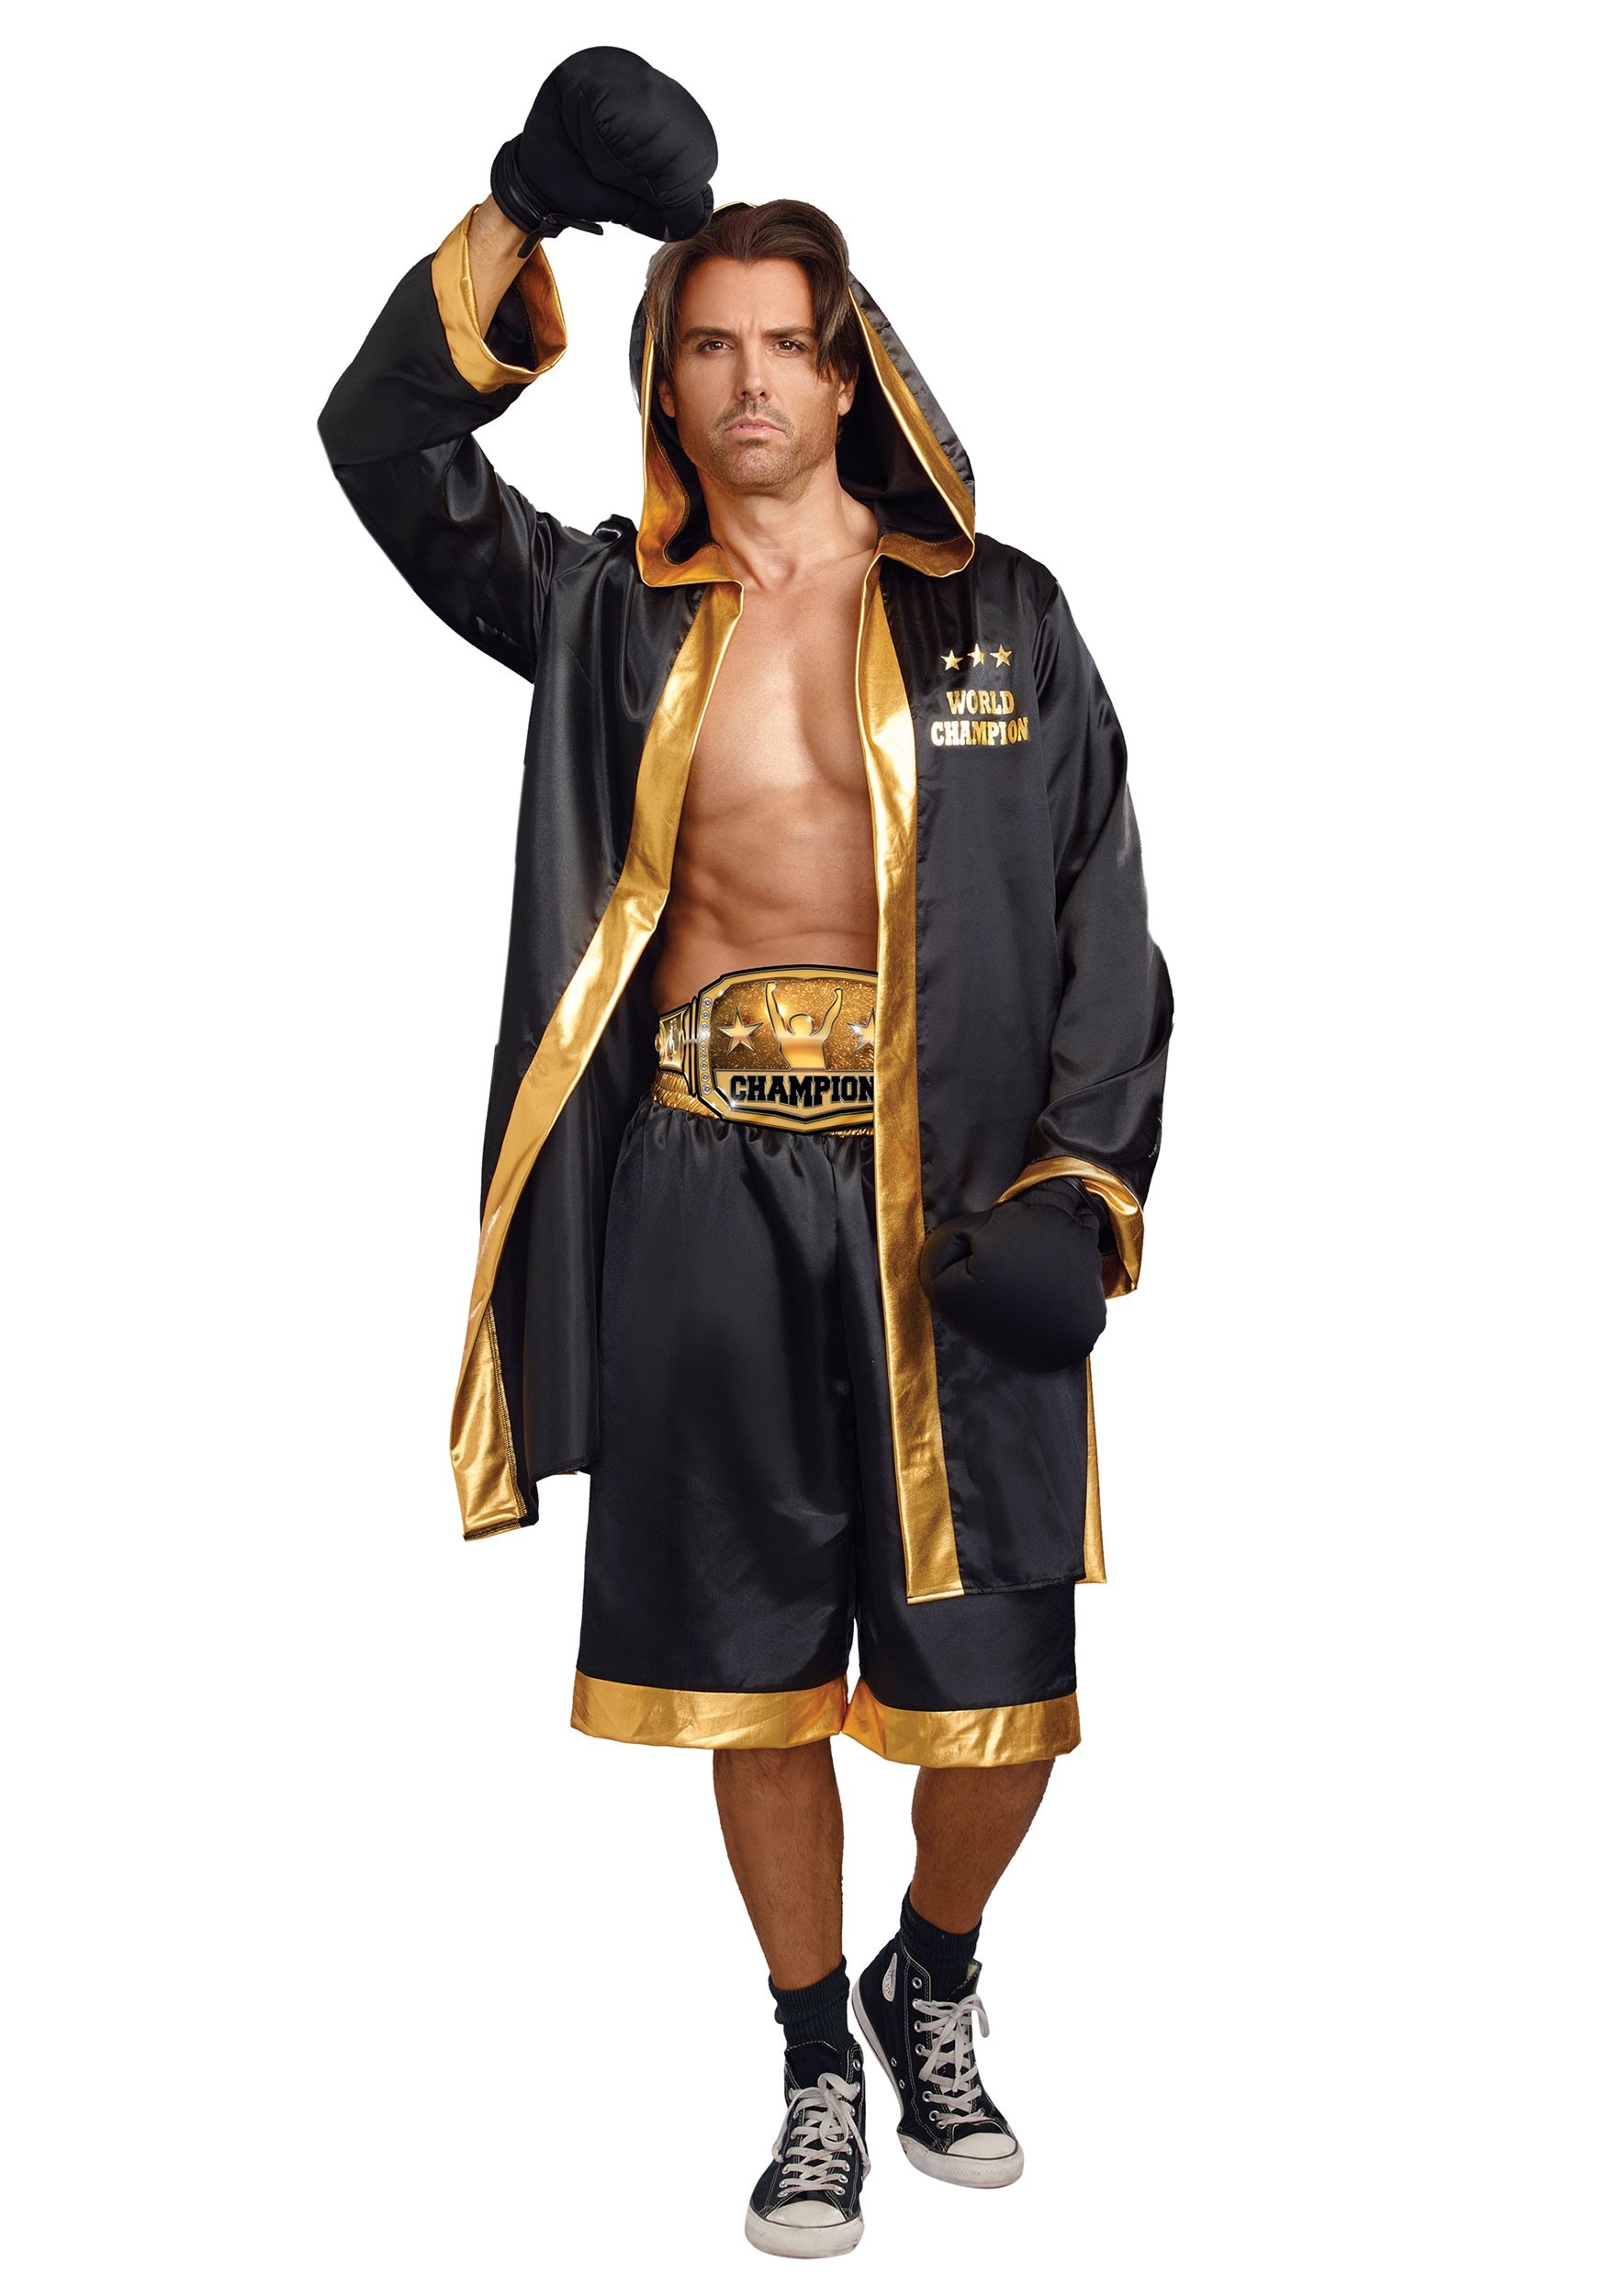 Classic Boxing Champion Costume Boxer Role Play Halloween Fancy Dress Hooded Boxing Set / Only Boxing Shorts 